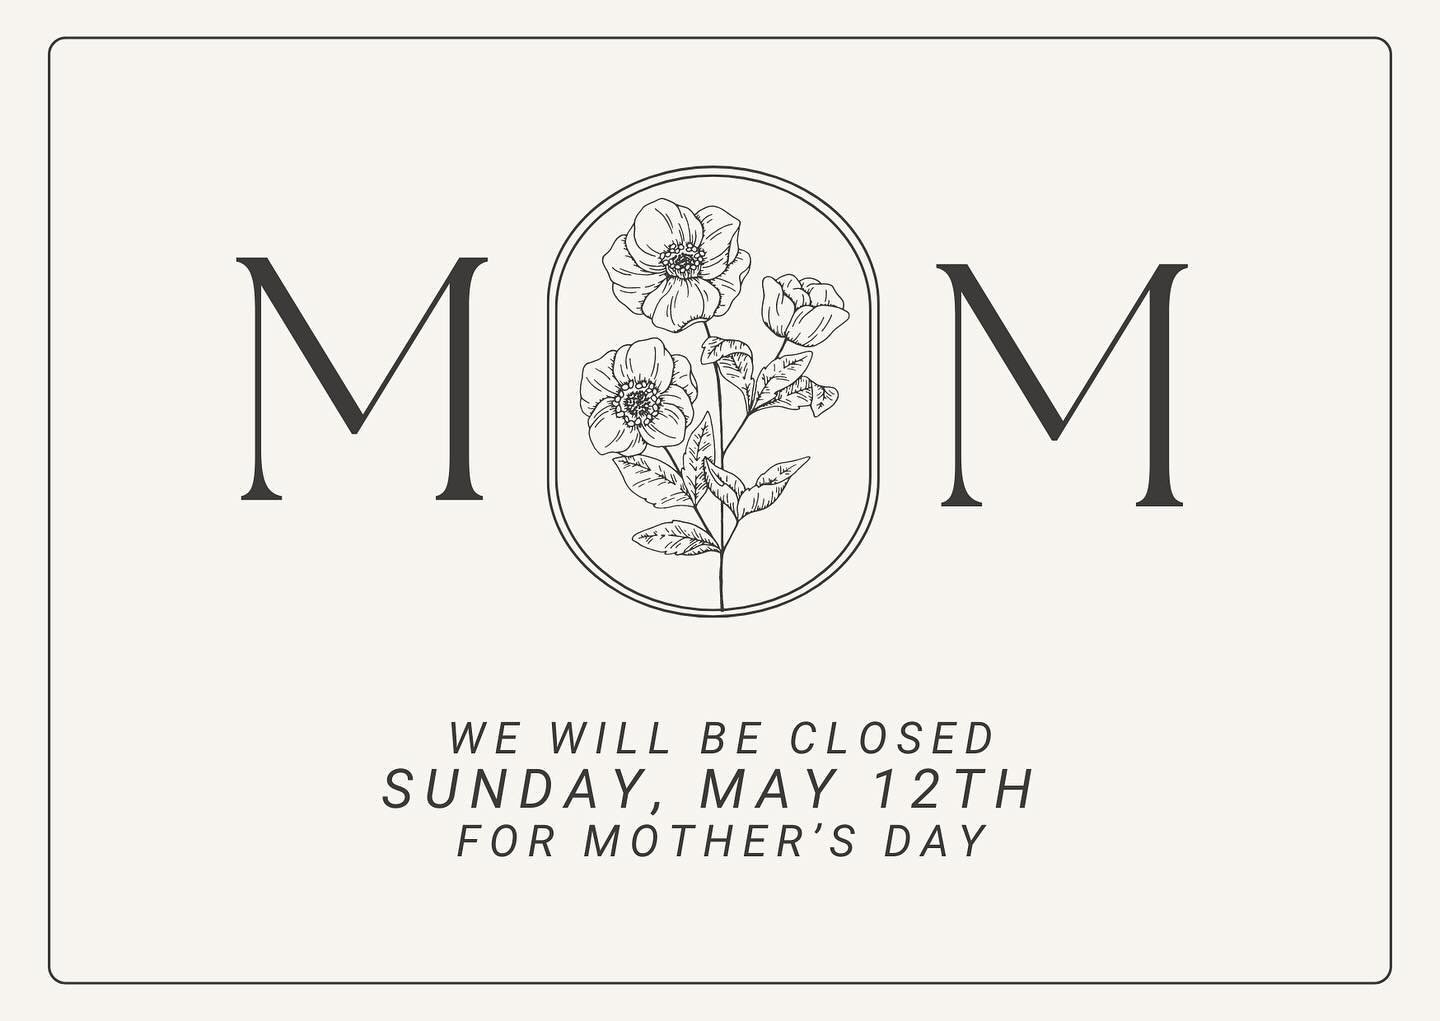 Whew, what a beautiful Saturday! The farmer&rsquo;s market was nice and packed and we loved seeing you all at the bakery bright and early this morning!

Just a reminder that we will be closed tomorrow for Mother&rsquo;s Day so be sure to pop in today